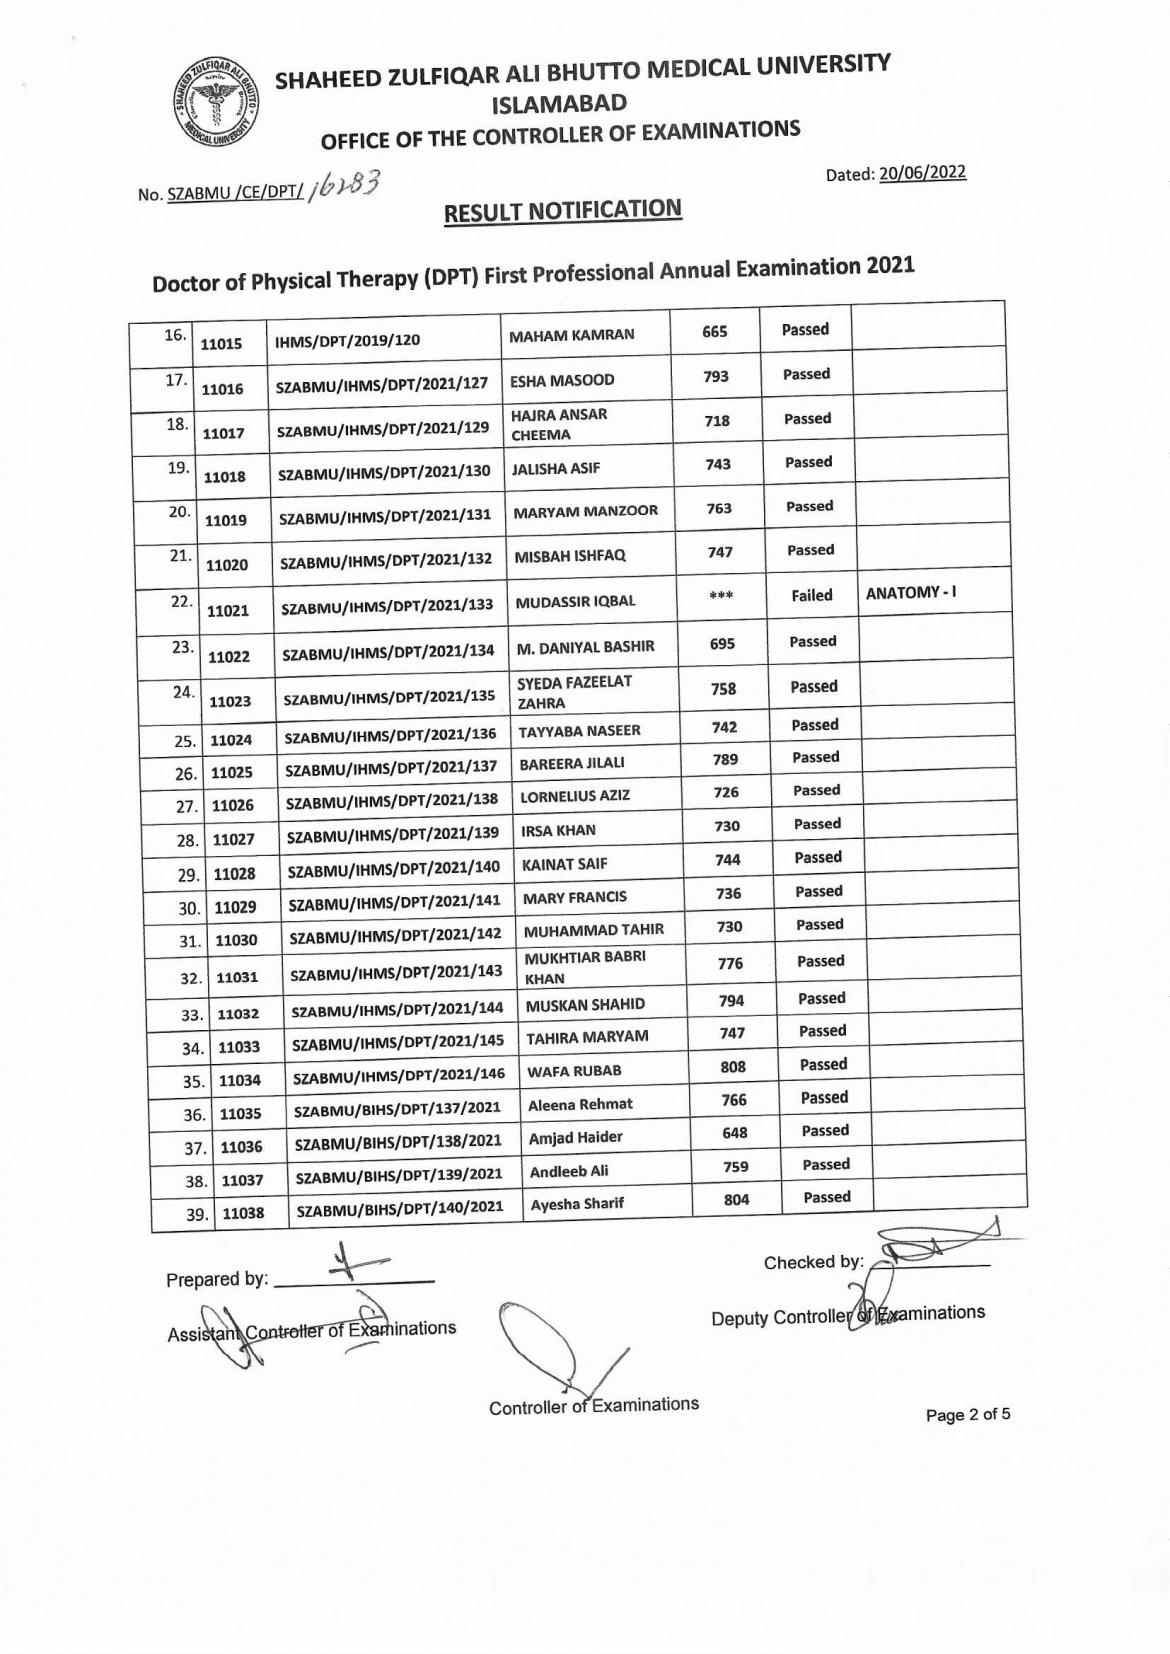 Result Notification - DPT First Professional Annual Examination 2021